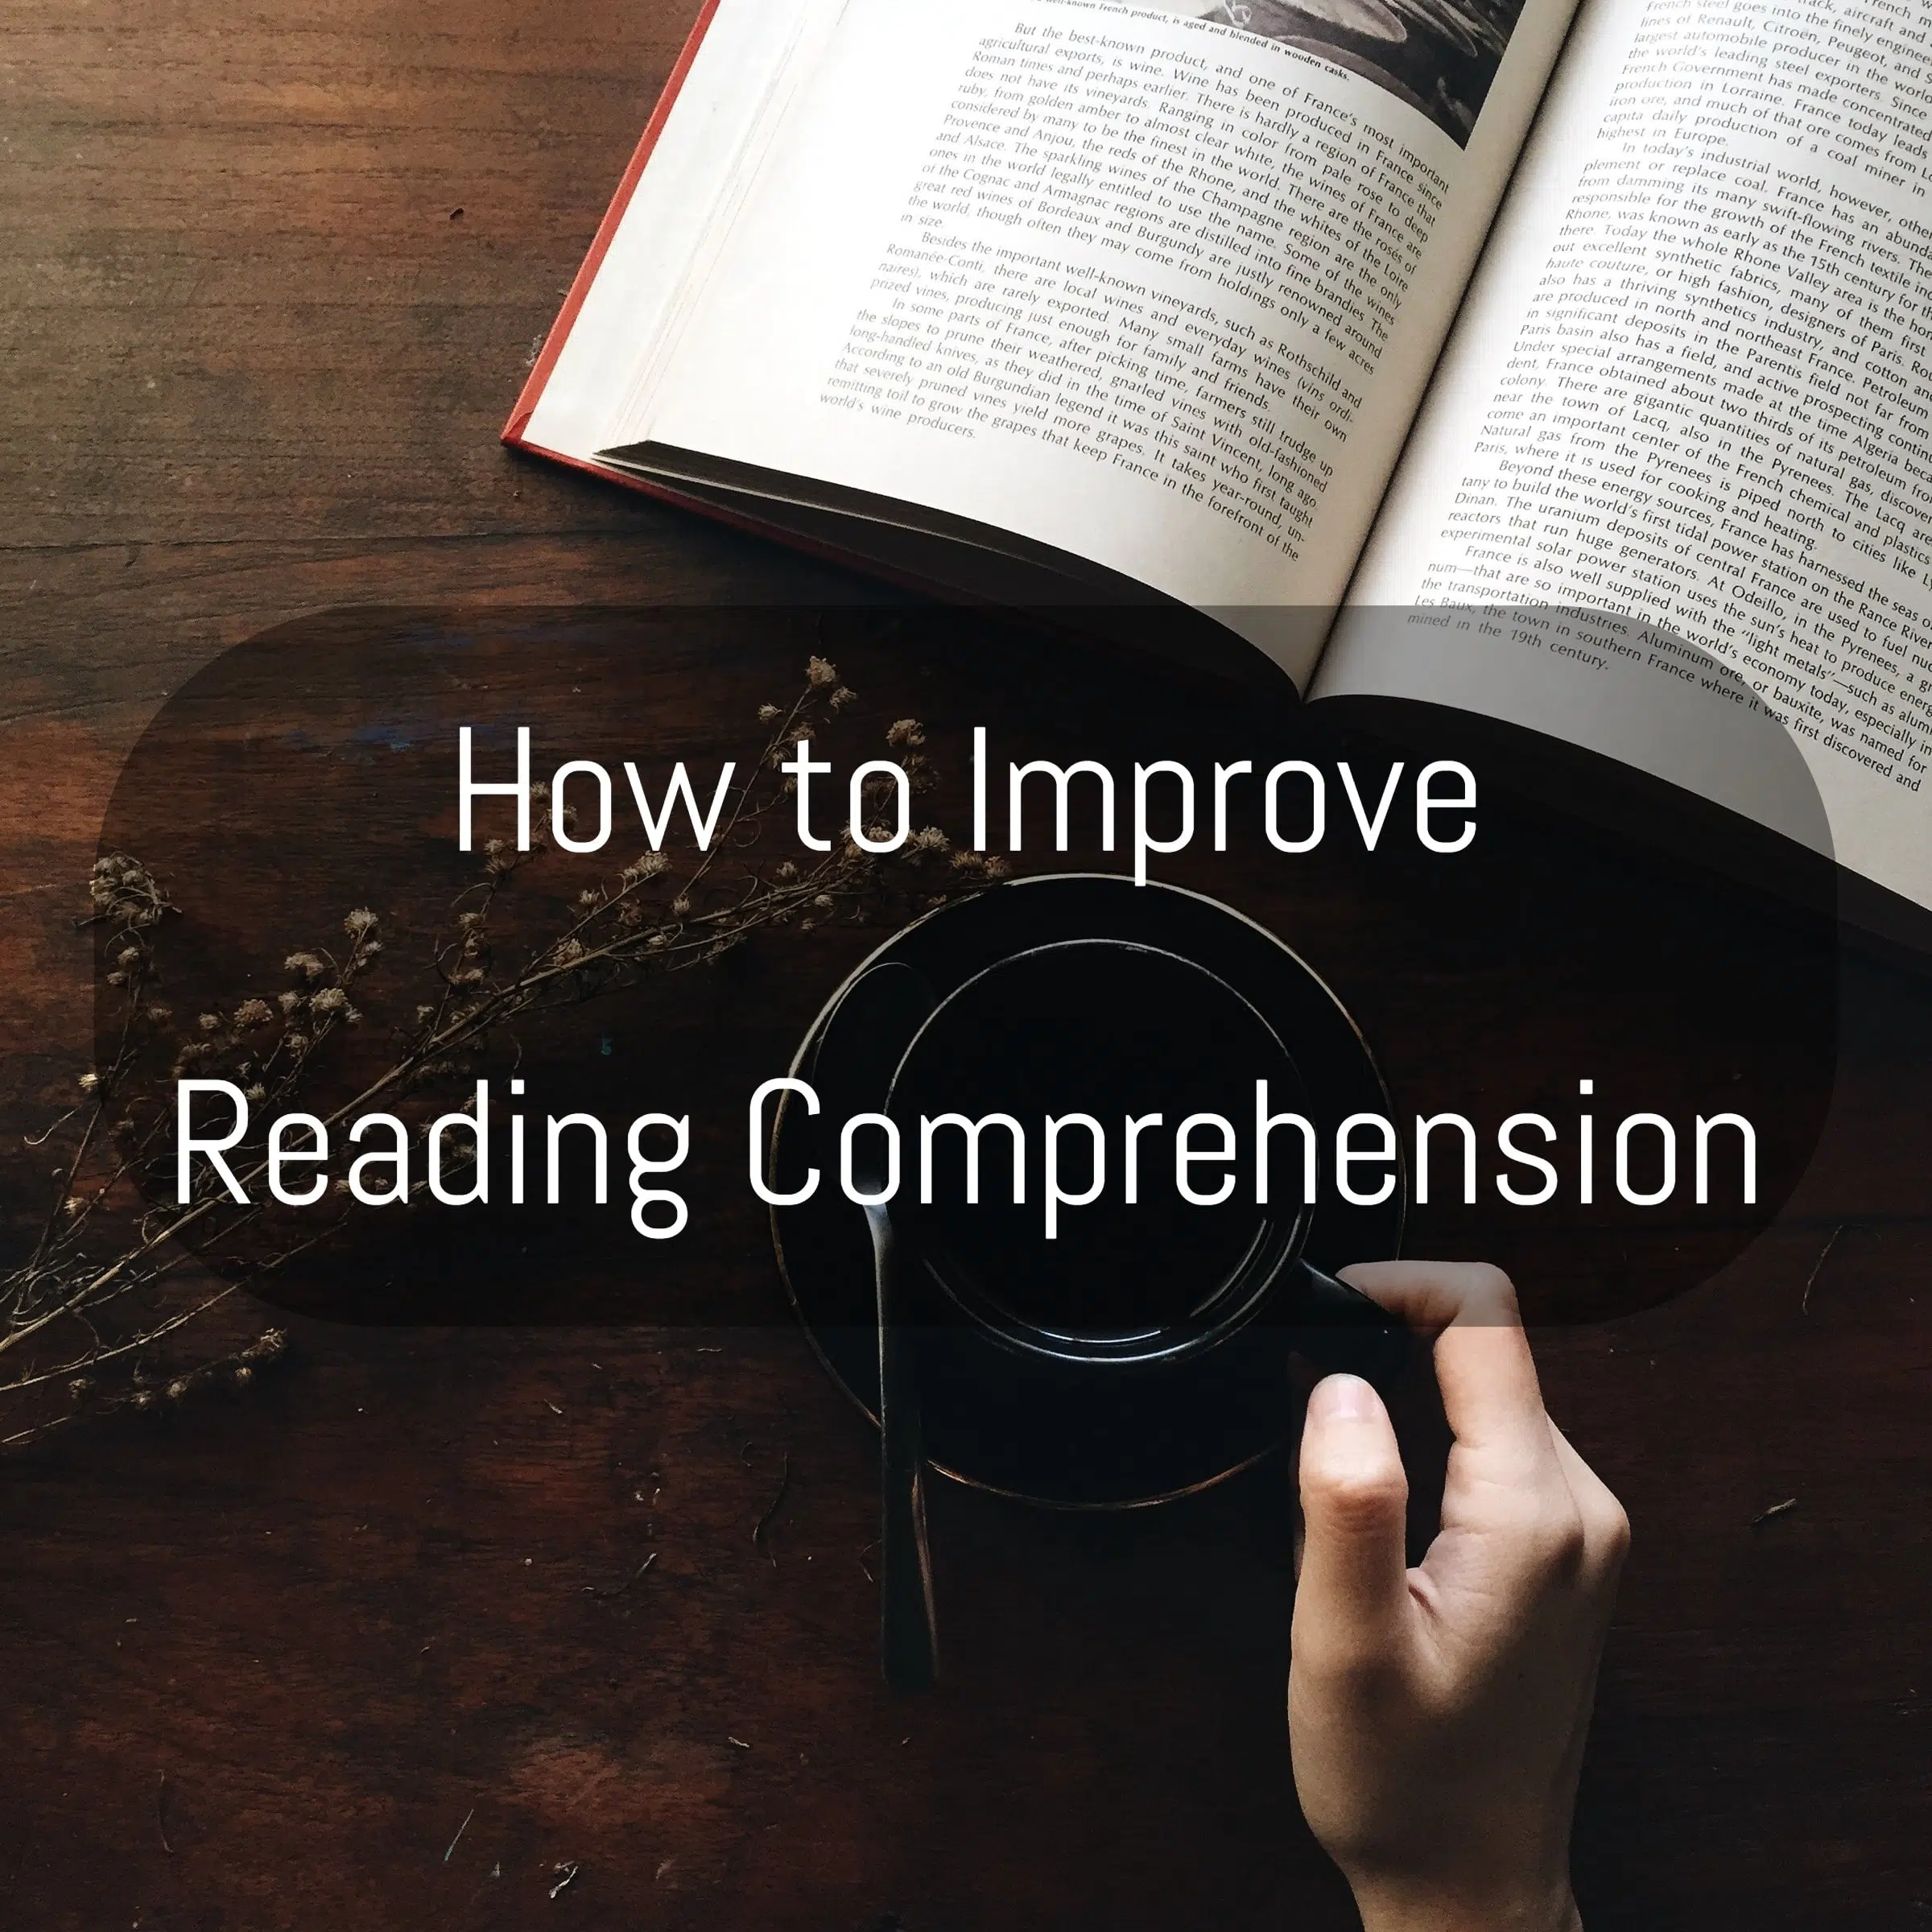 How to Improve Reading Comprehension